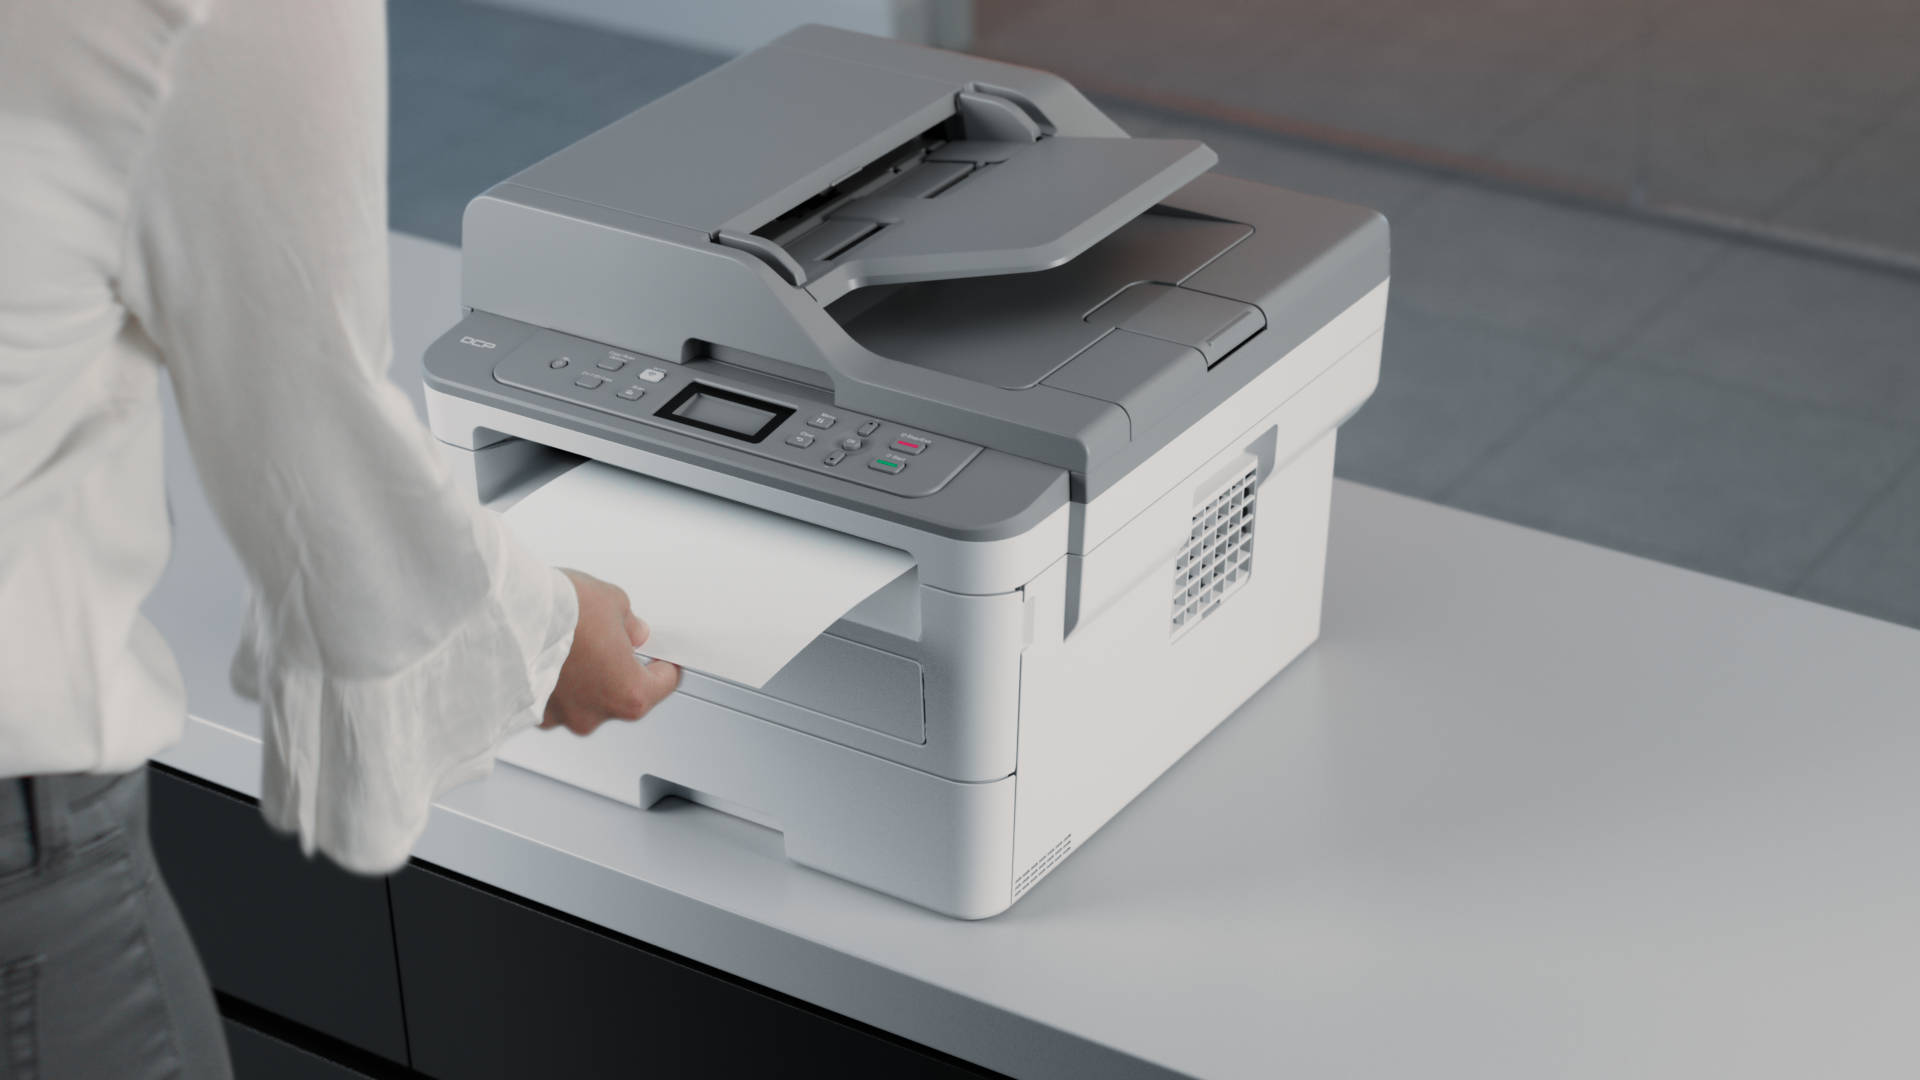 Composite of live footage of a person interacting with a CG printer.